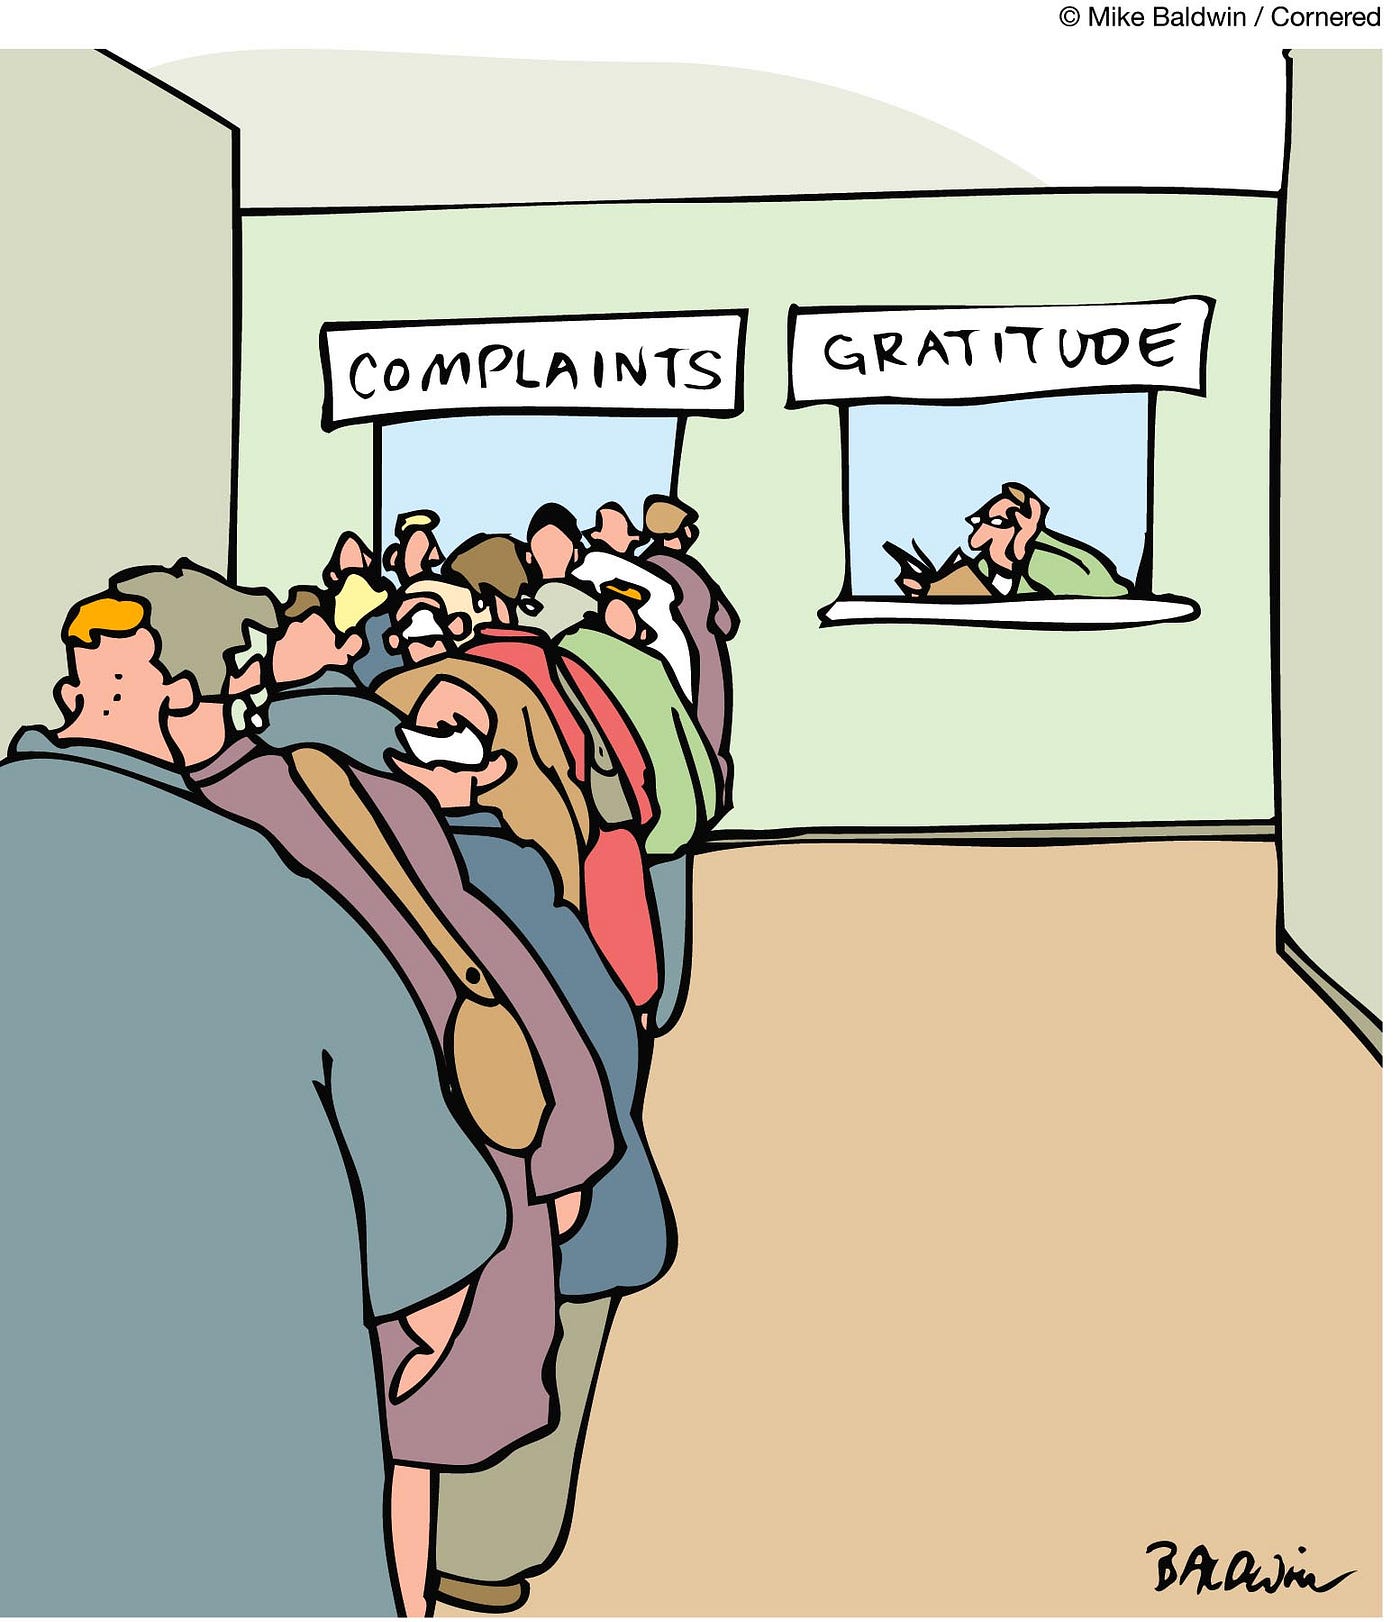 Thanksgiving Gratitude and the Spirit of Giving Back